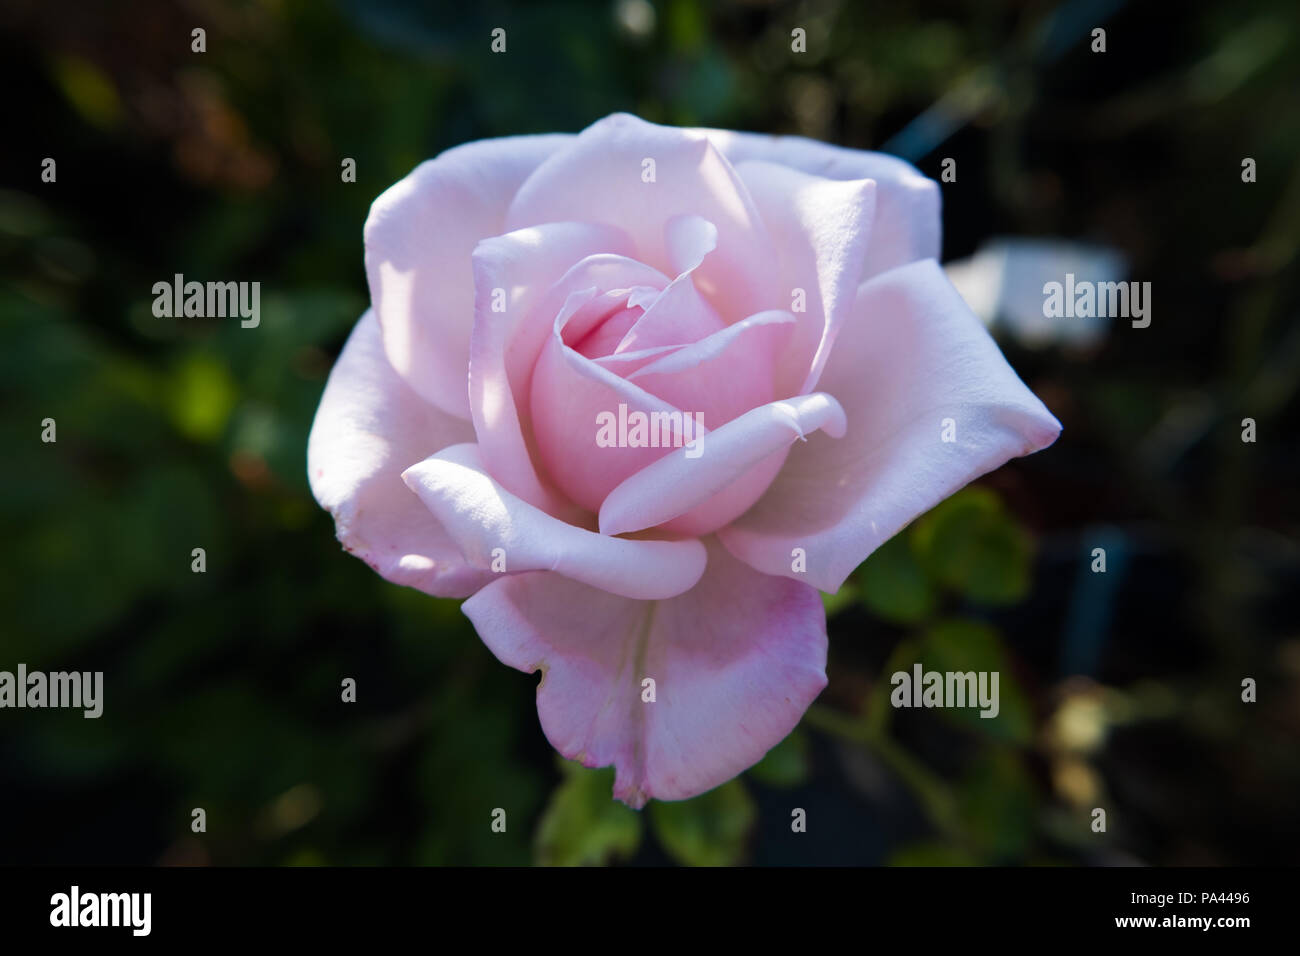 Pink rose flower wallpaper background. Beautiful image of nature. No people  Stock Photo - Alamy